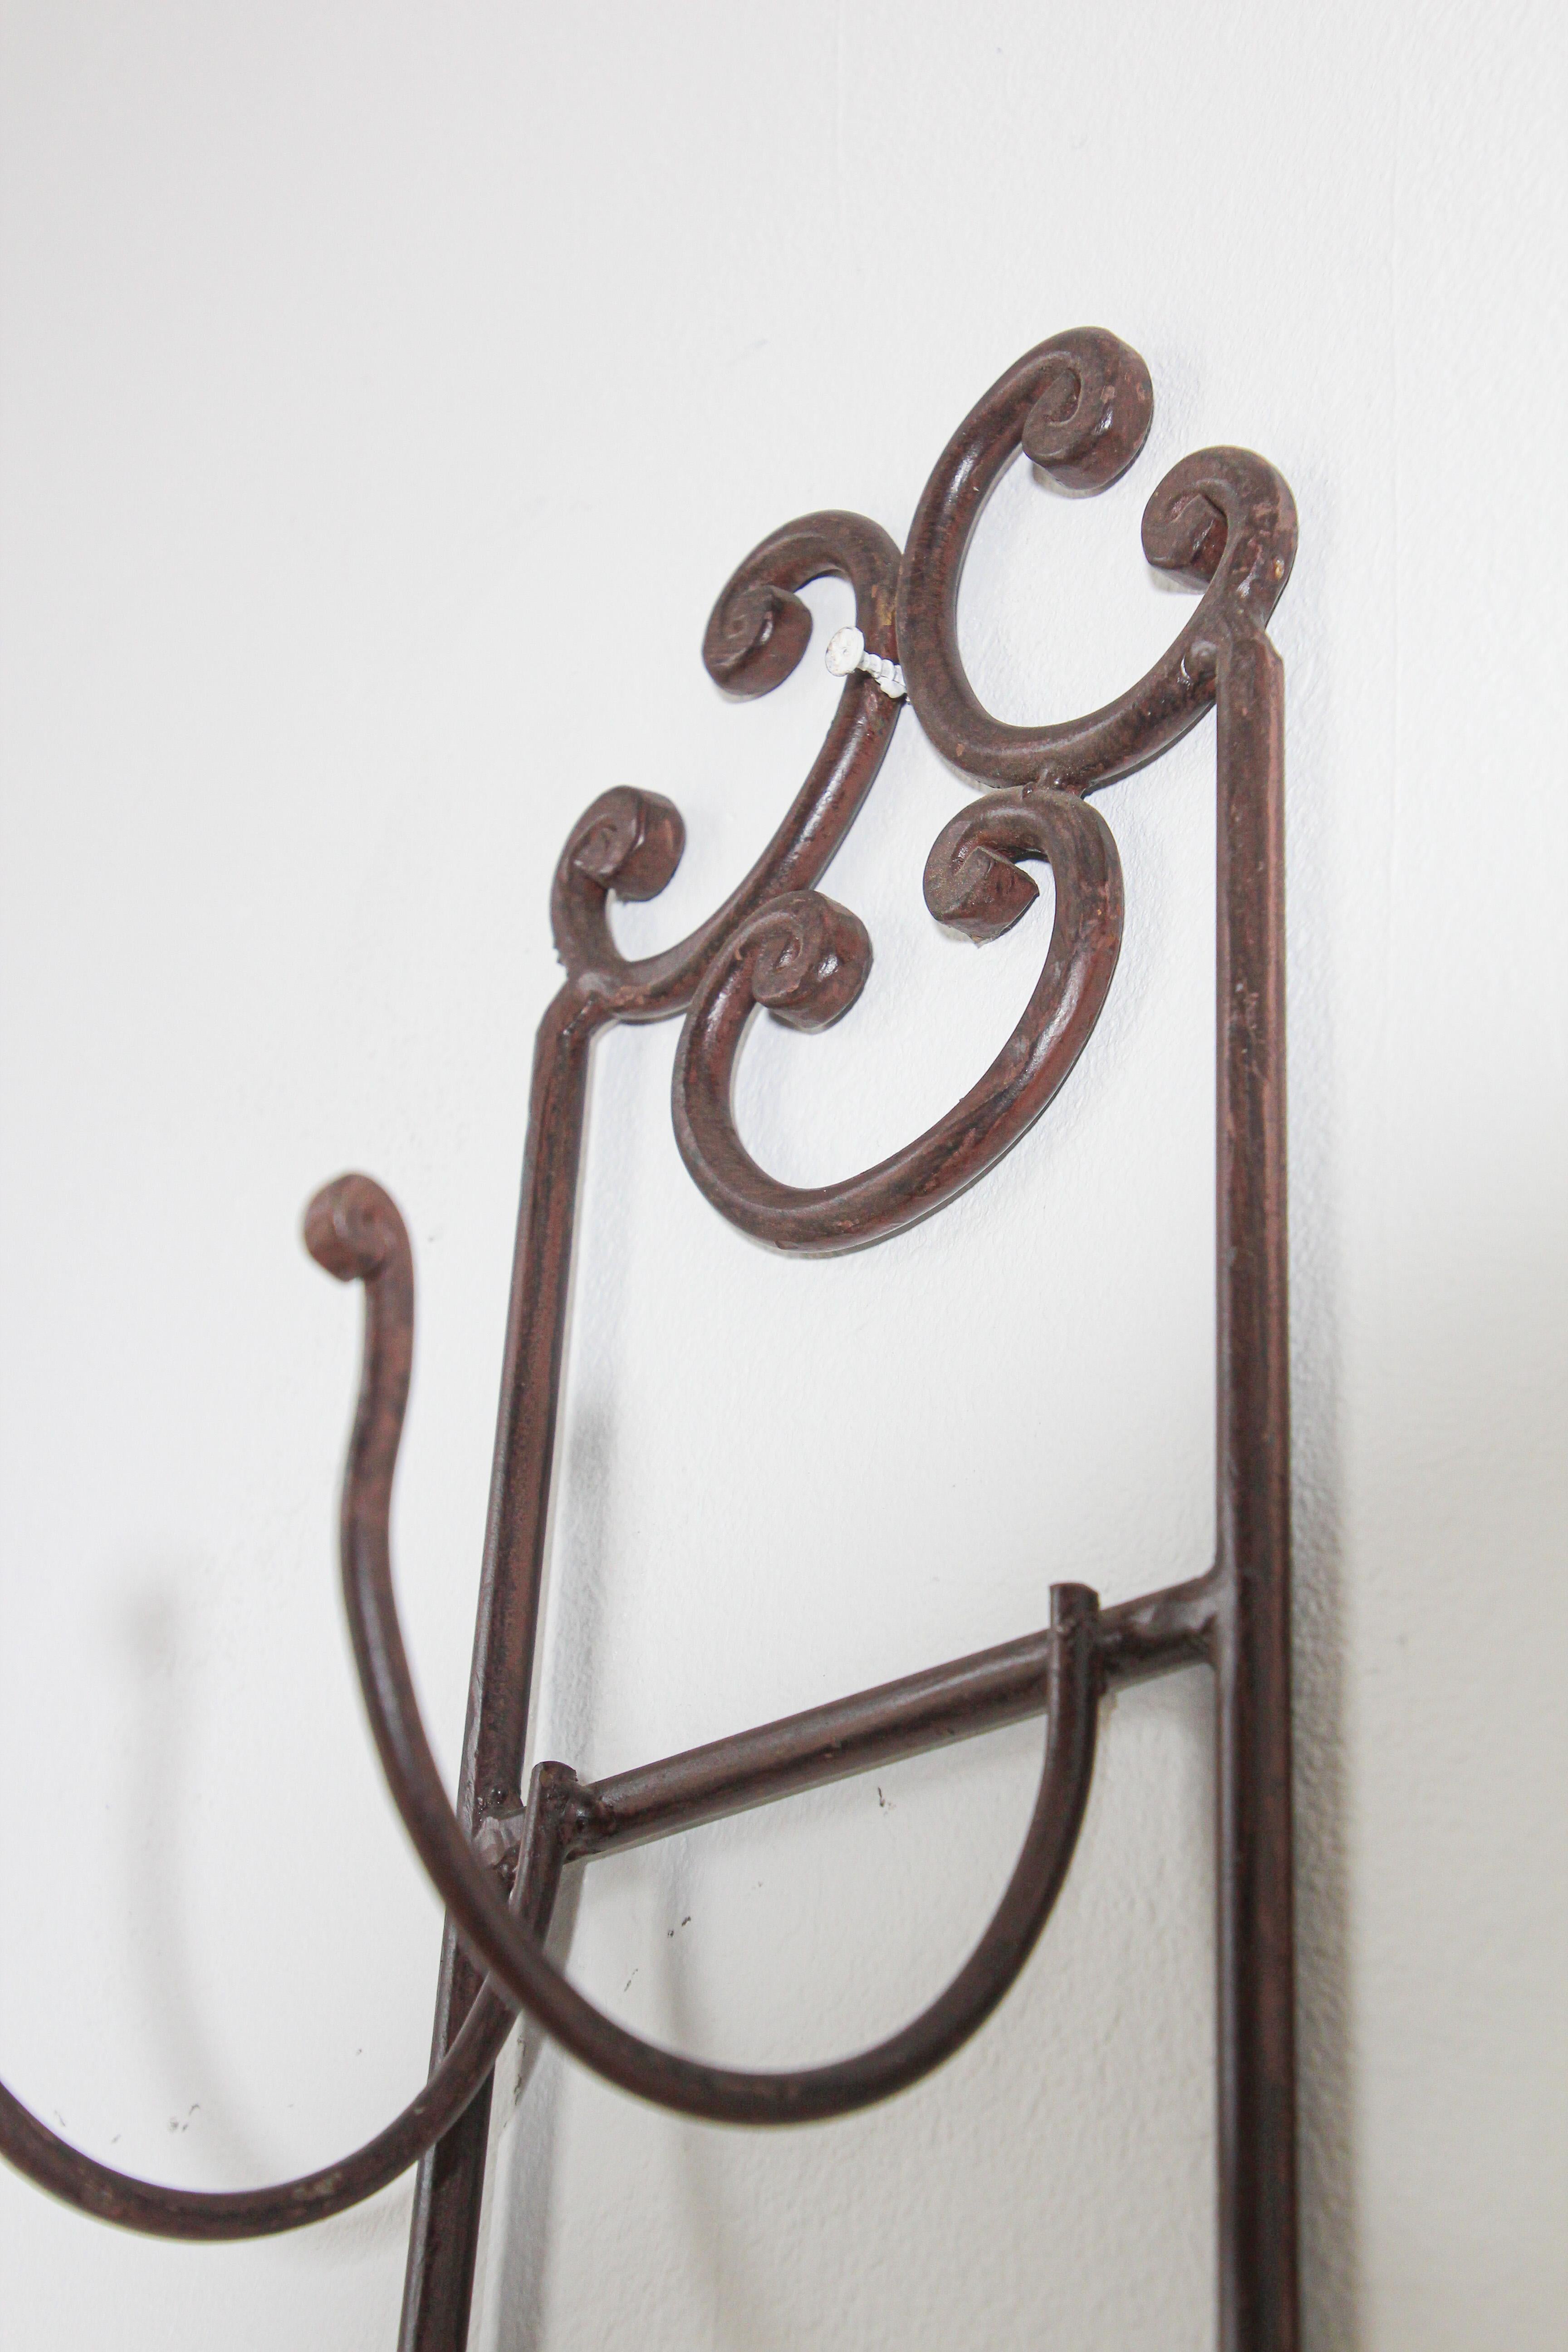 American Wrought Iron Hand Forged Vintage Bathroom Towel Holder